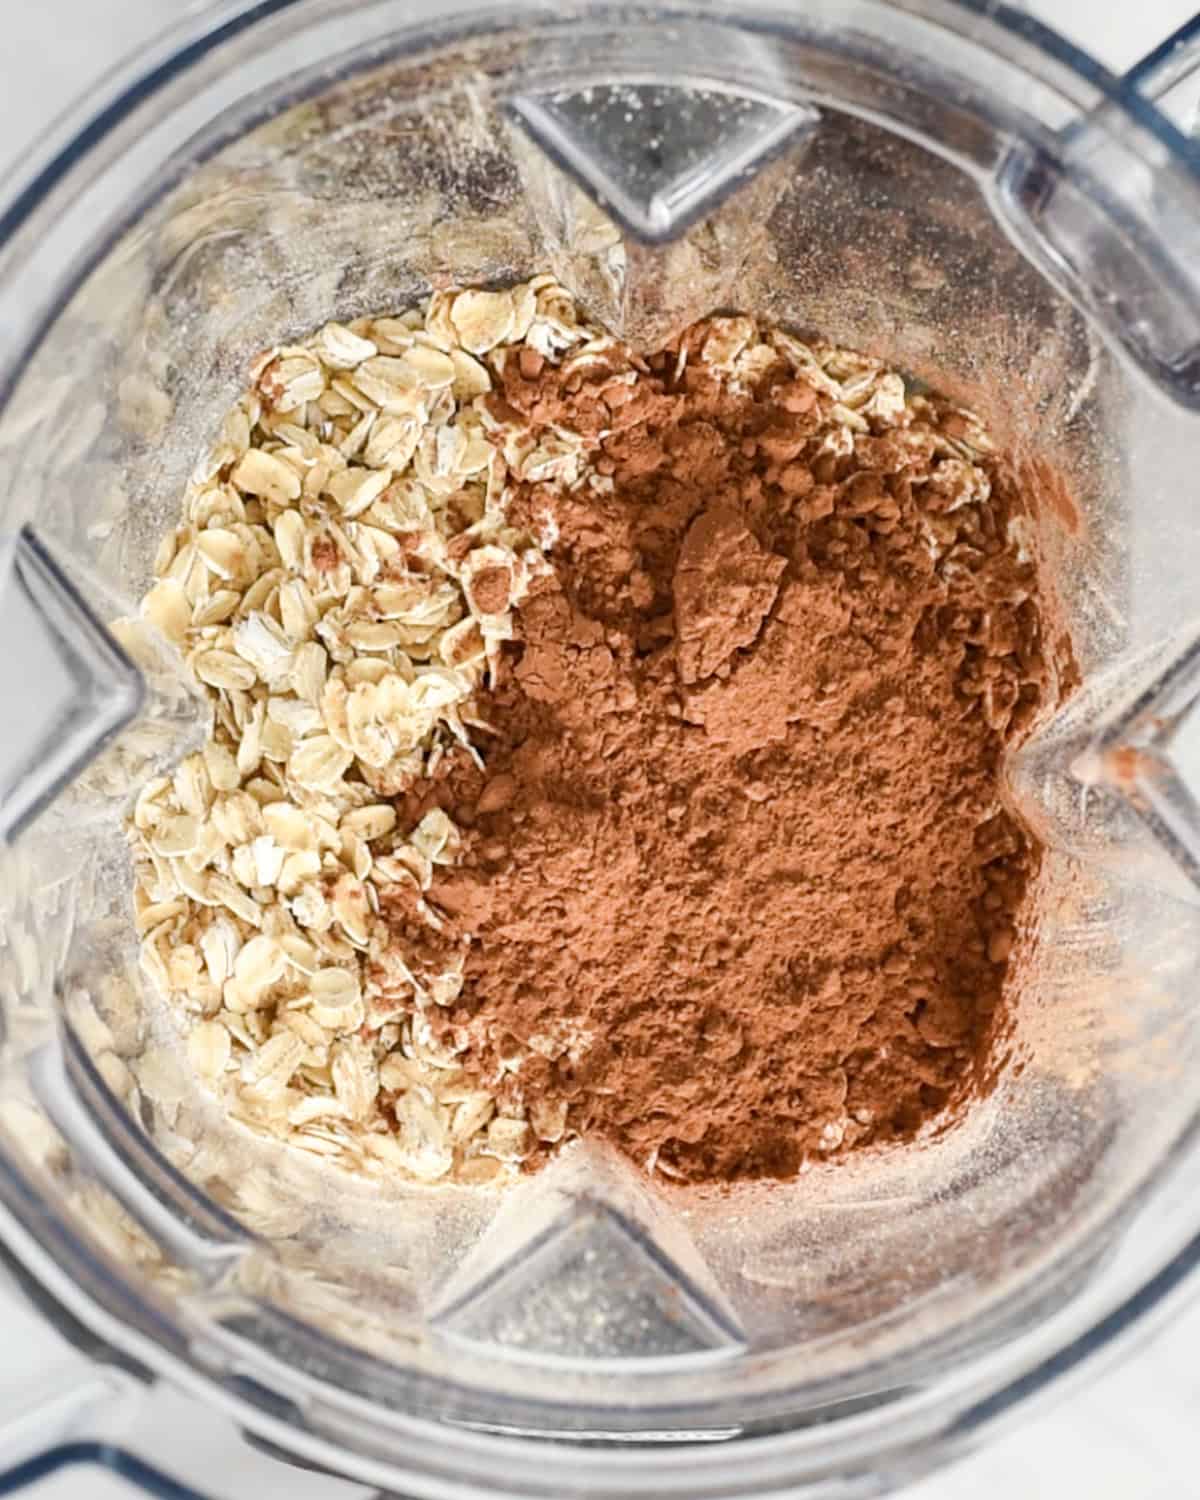 oats and cocoa powder in the container of a blender before blending to make Healthy Chocolate Pancakes 